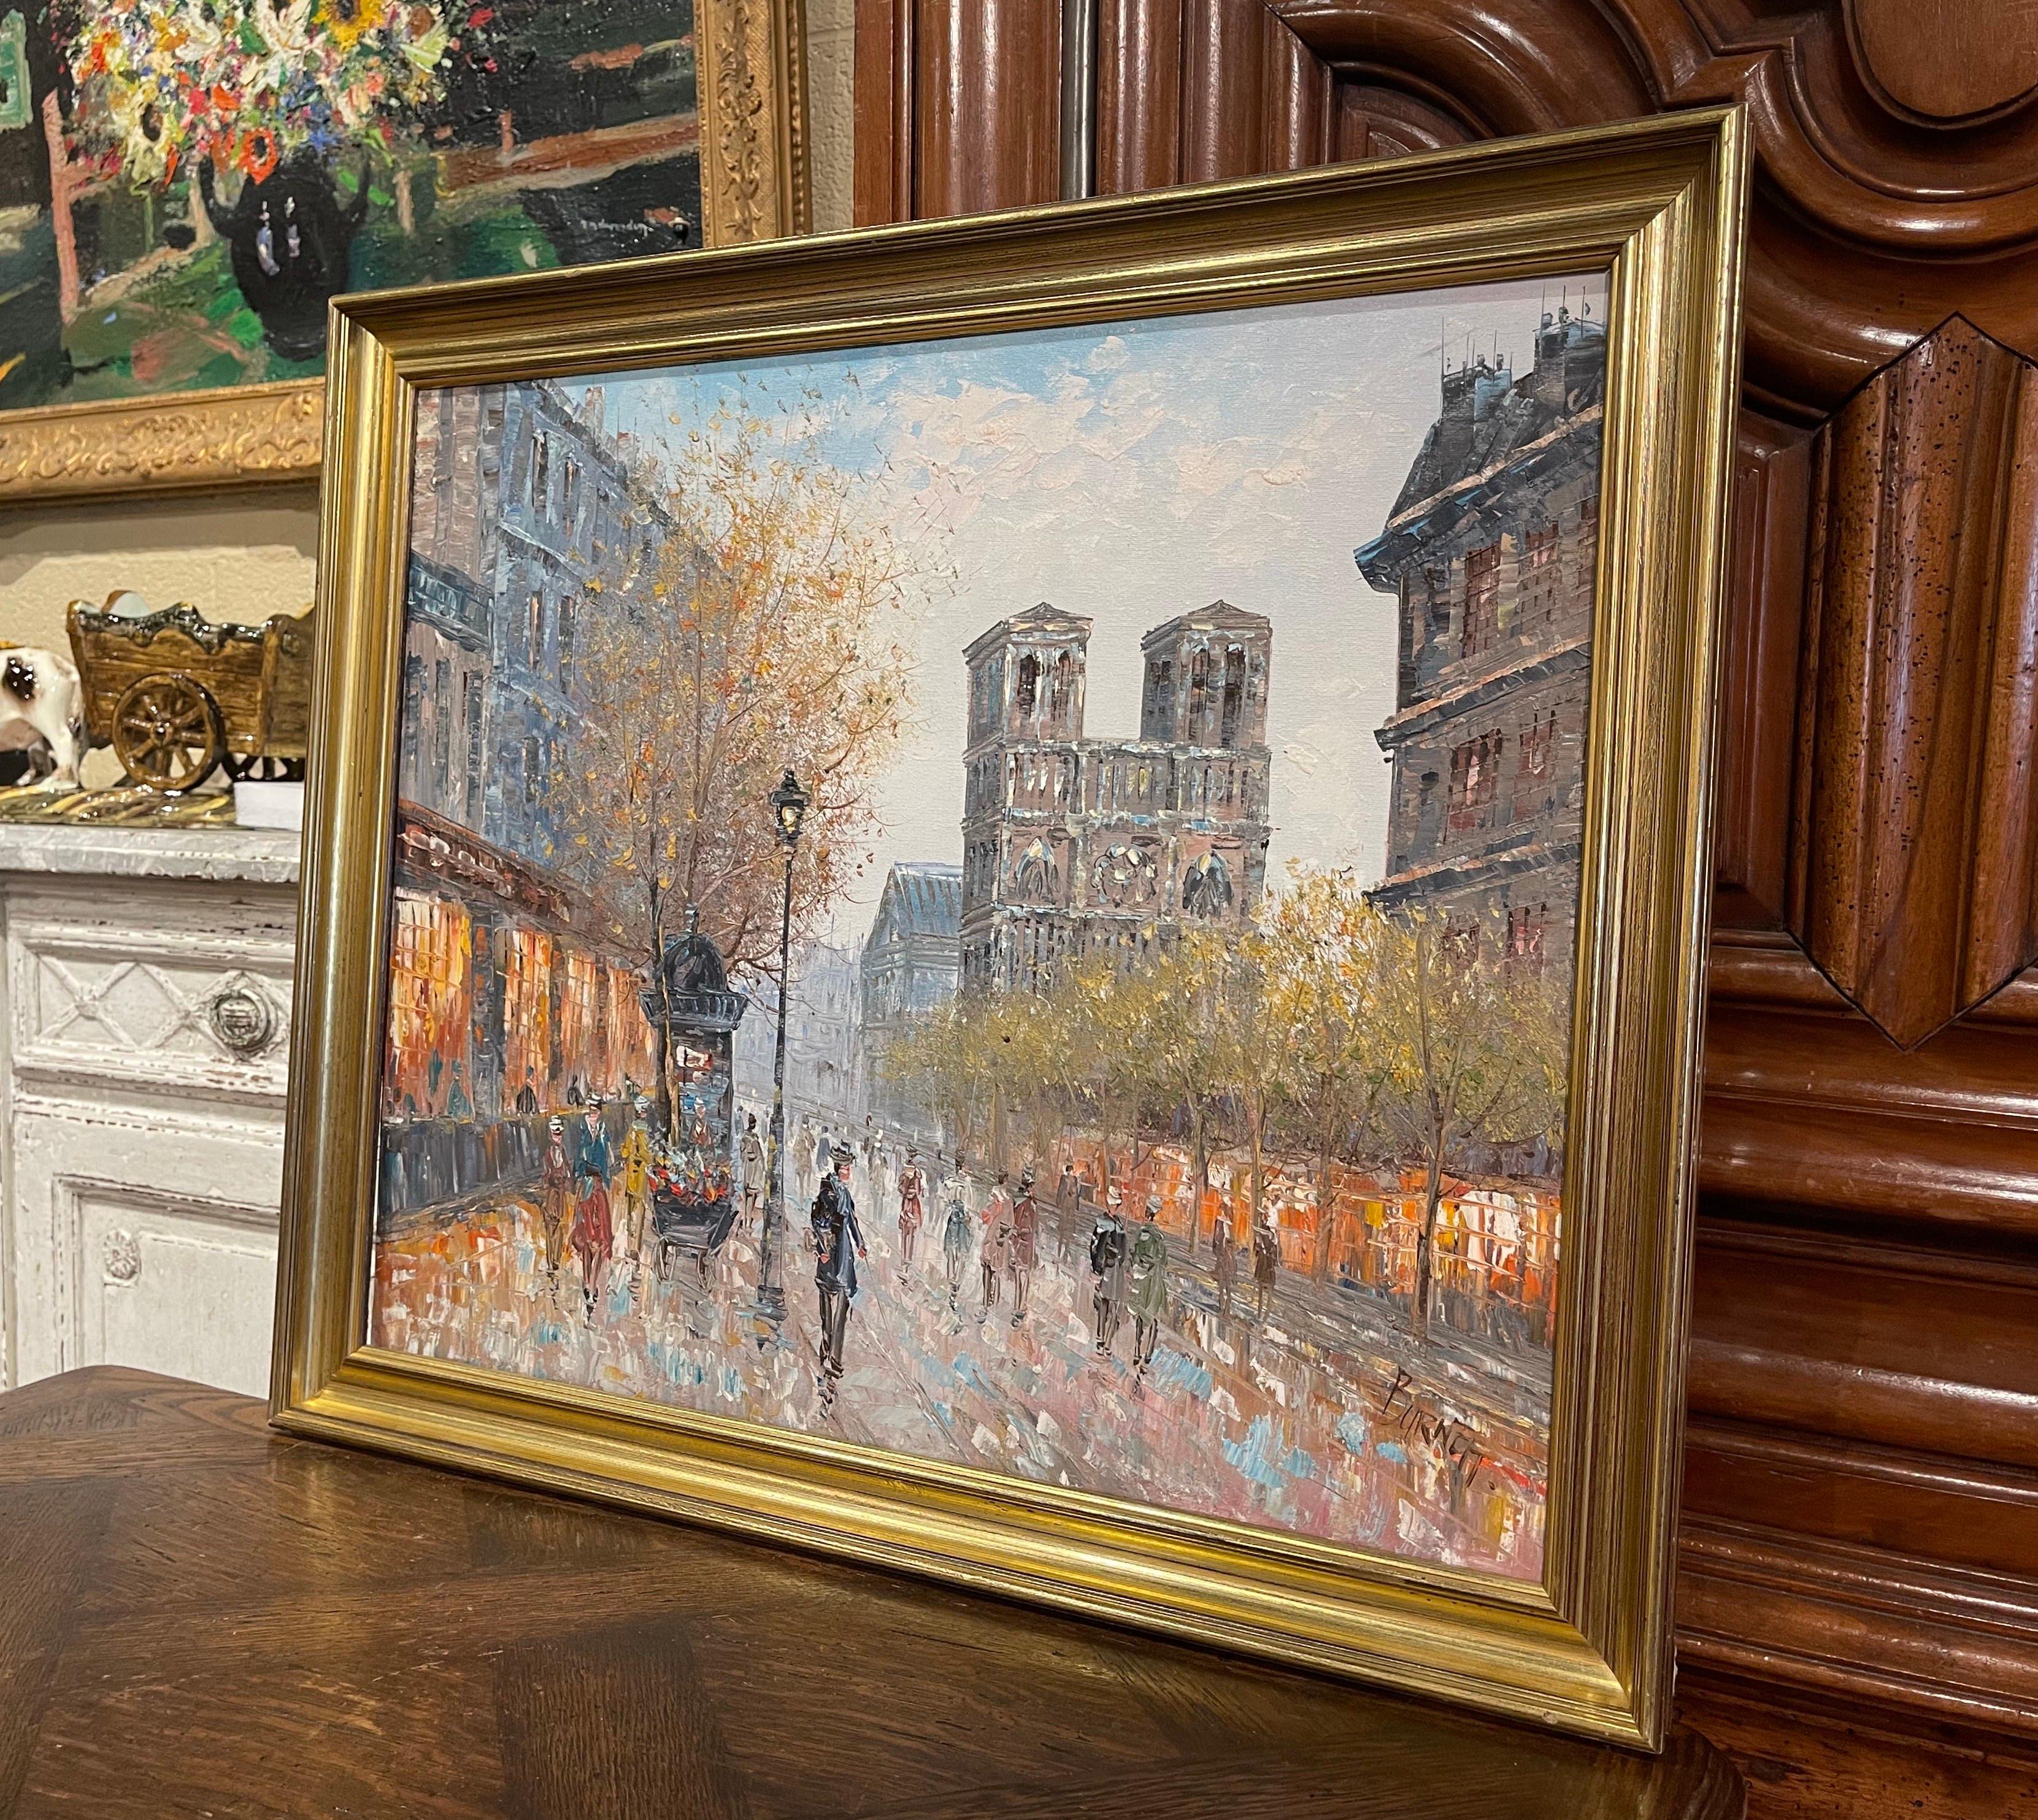 Set in a carved giltwood frame, the painting depicts one of Paris most iconic monuments, Notre-Dame; the artwork of the cathedral at dawn is signed on the bottom right corner by the artist, Caroline Burnett. The oil on canvas is in excellent